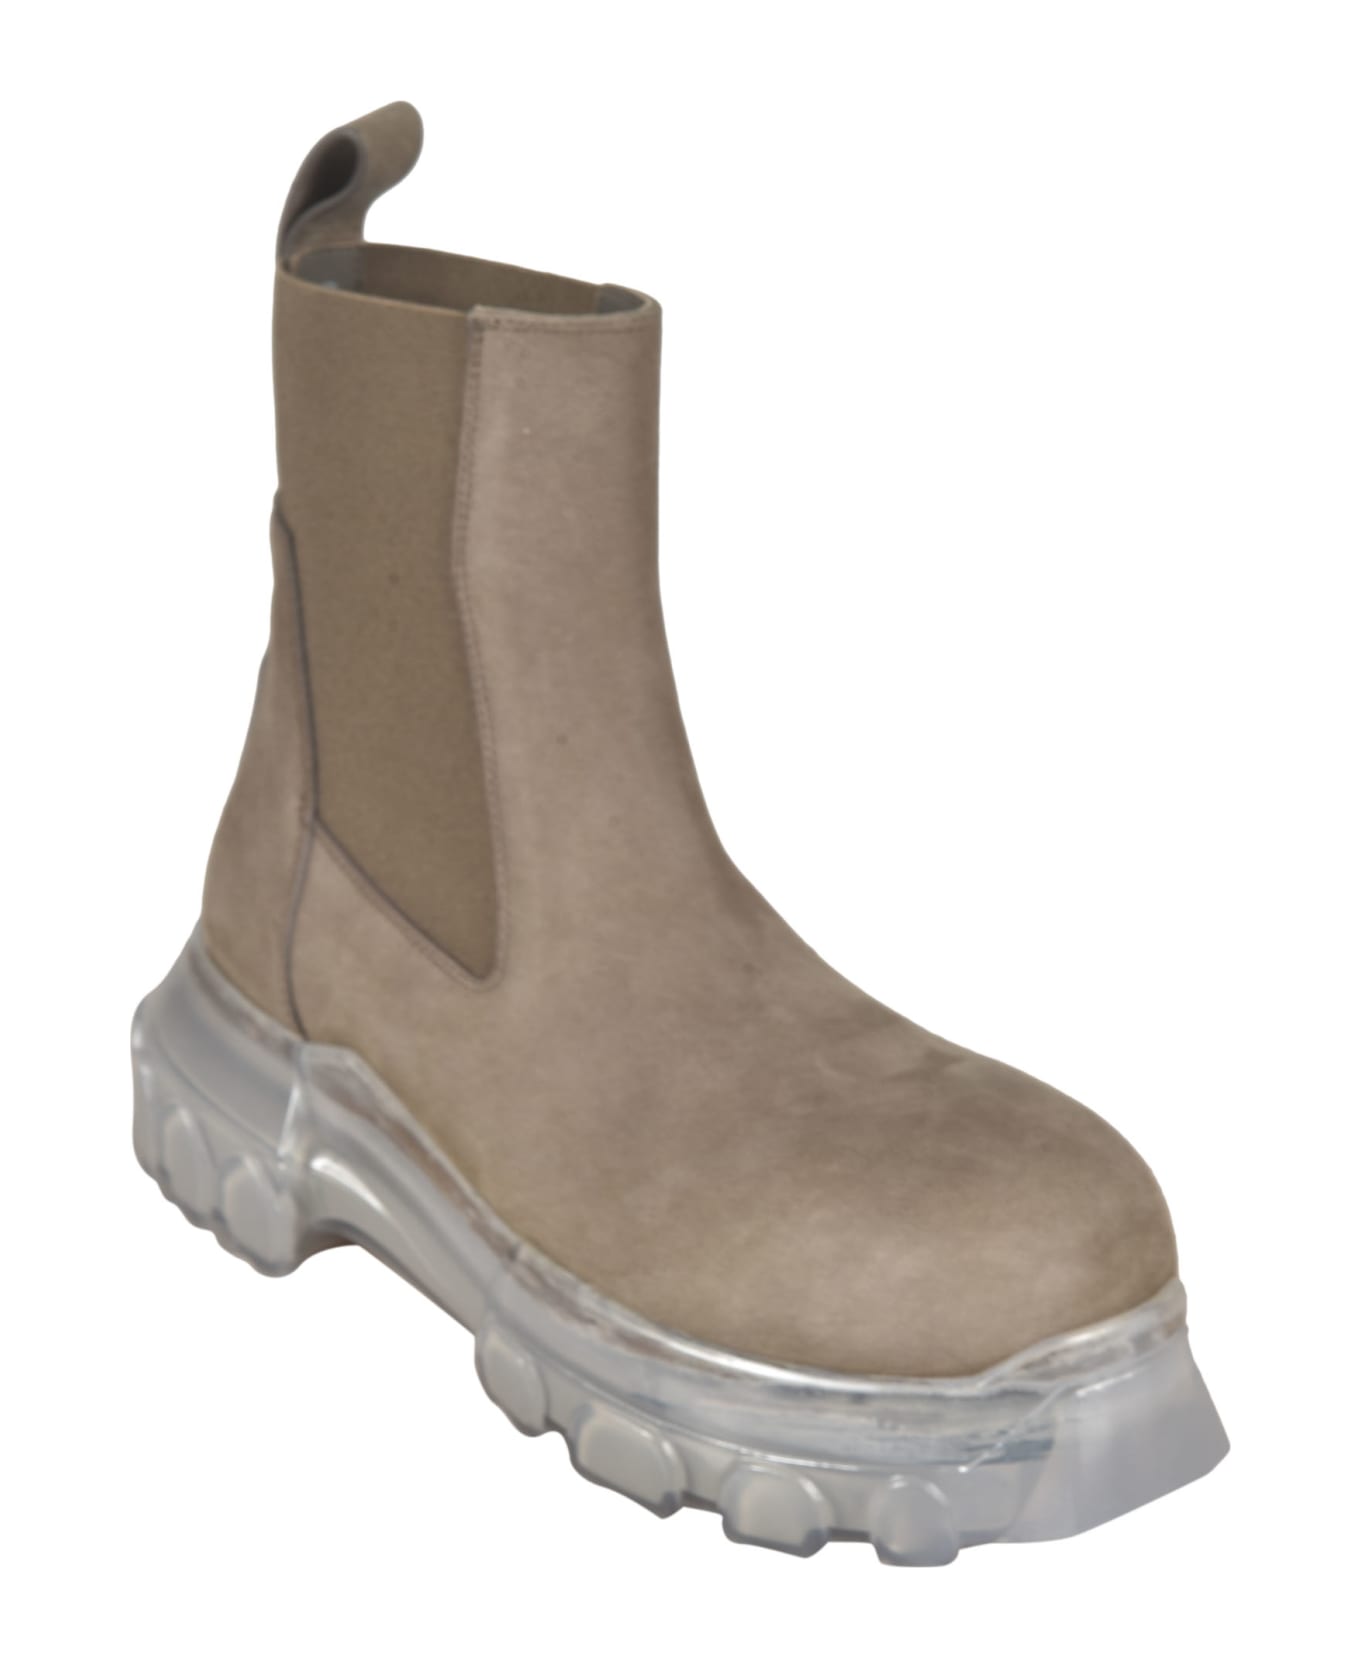 Rick Owens Beatle Bozo Tractor Boots - Dust/Clear